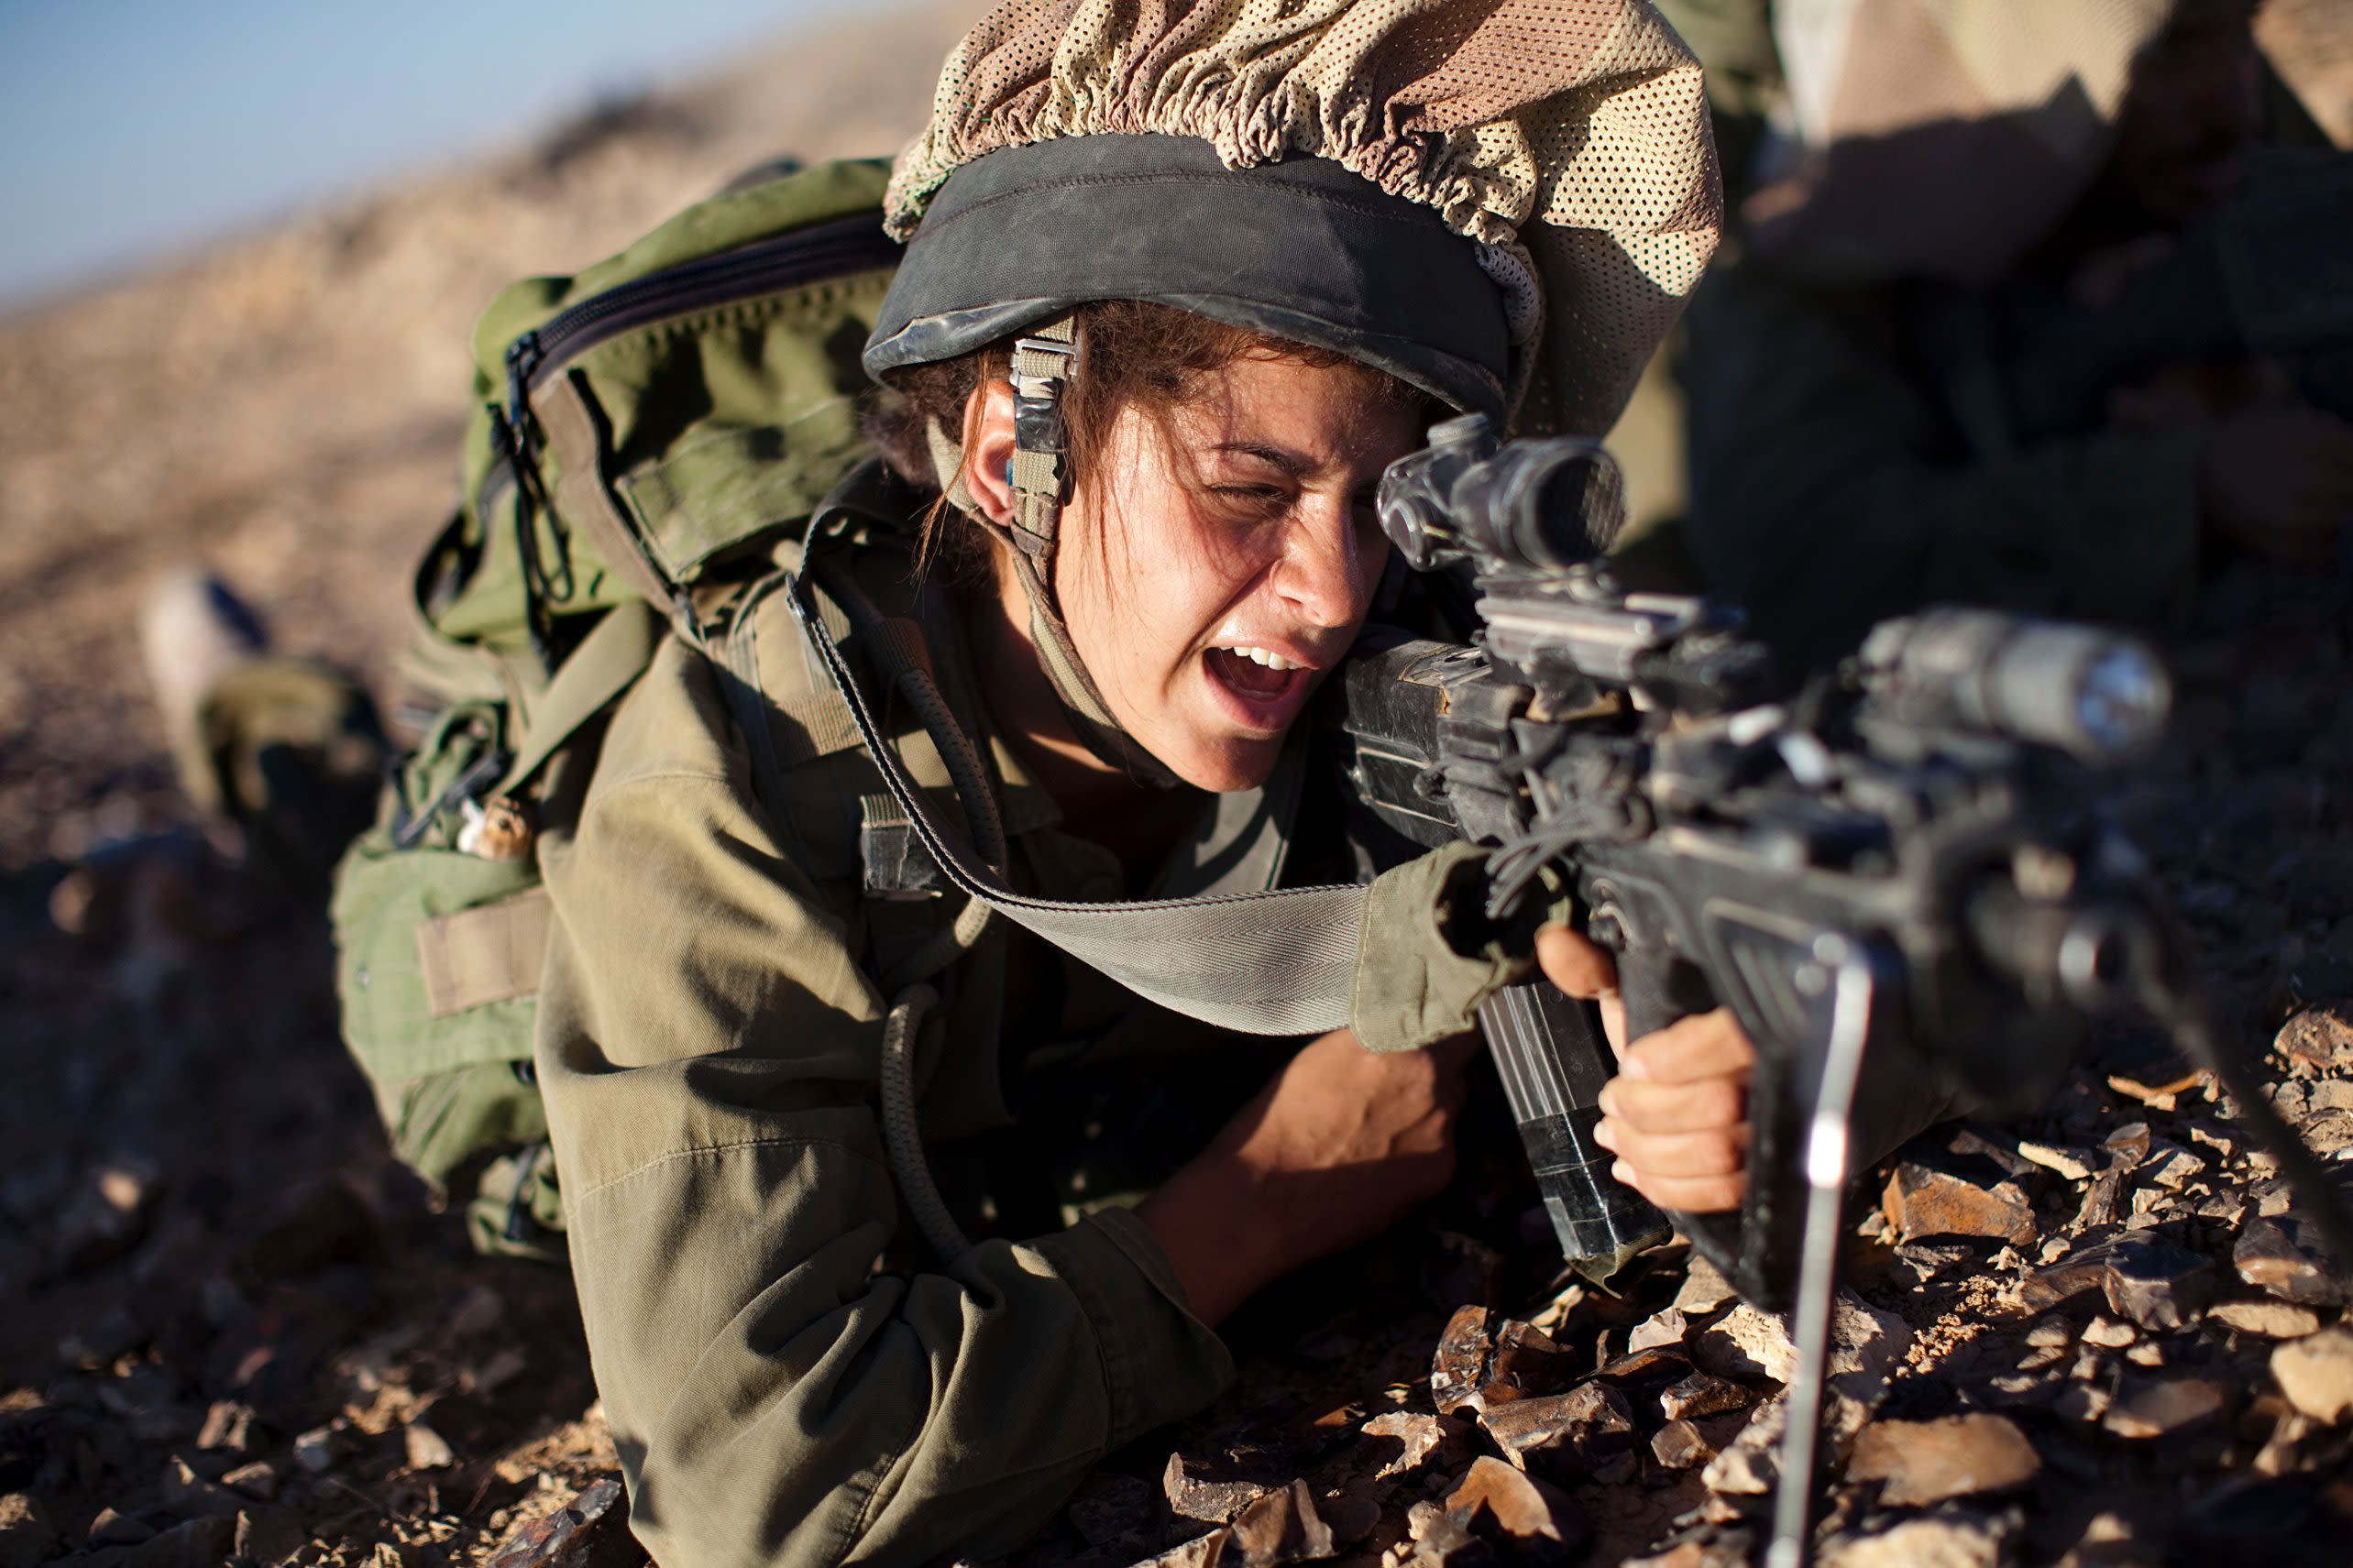 Nine countries that allow women in combat positions